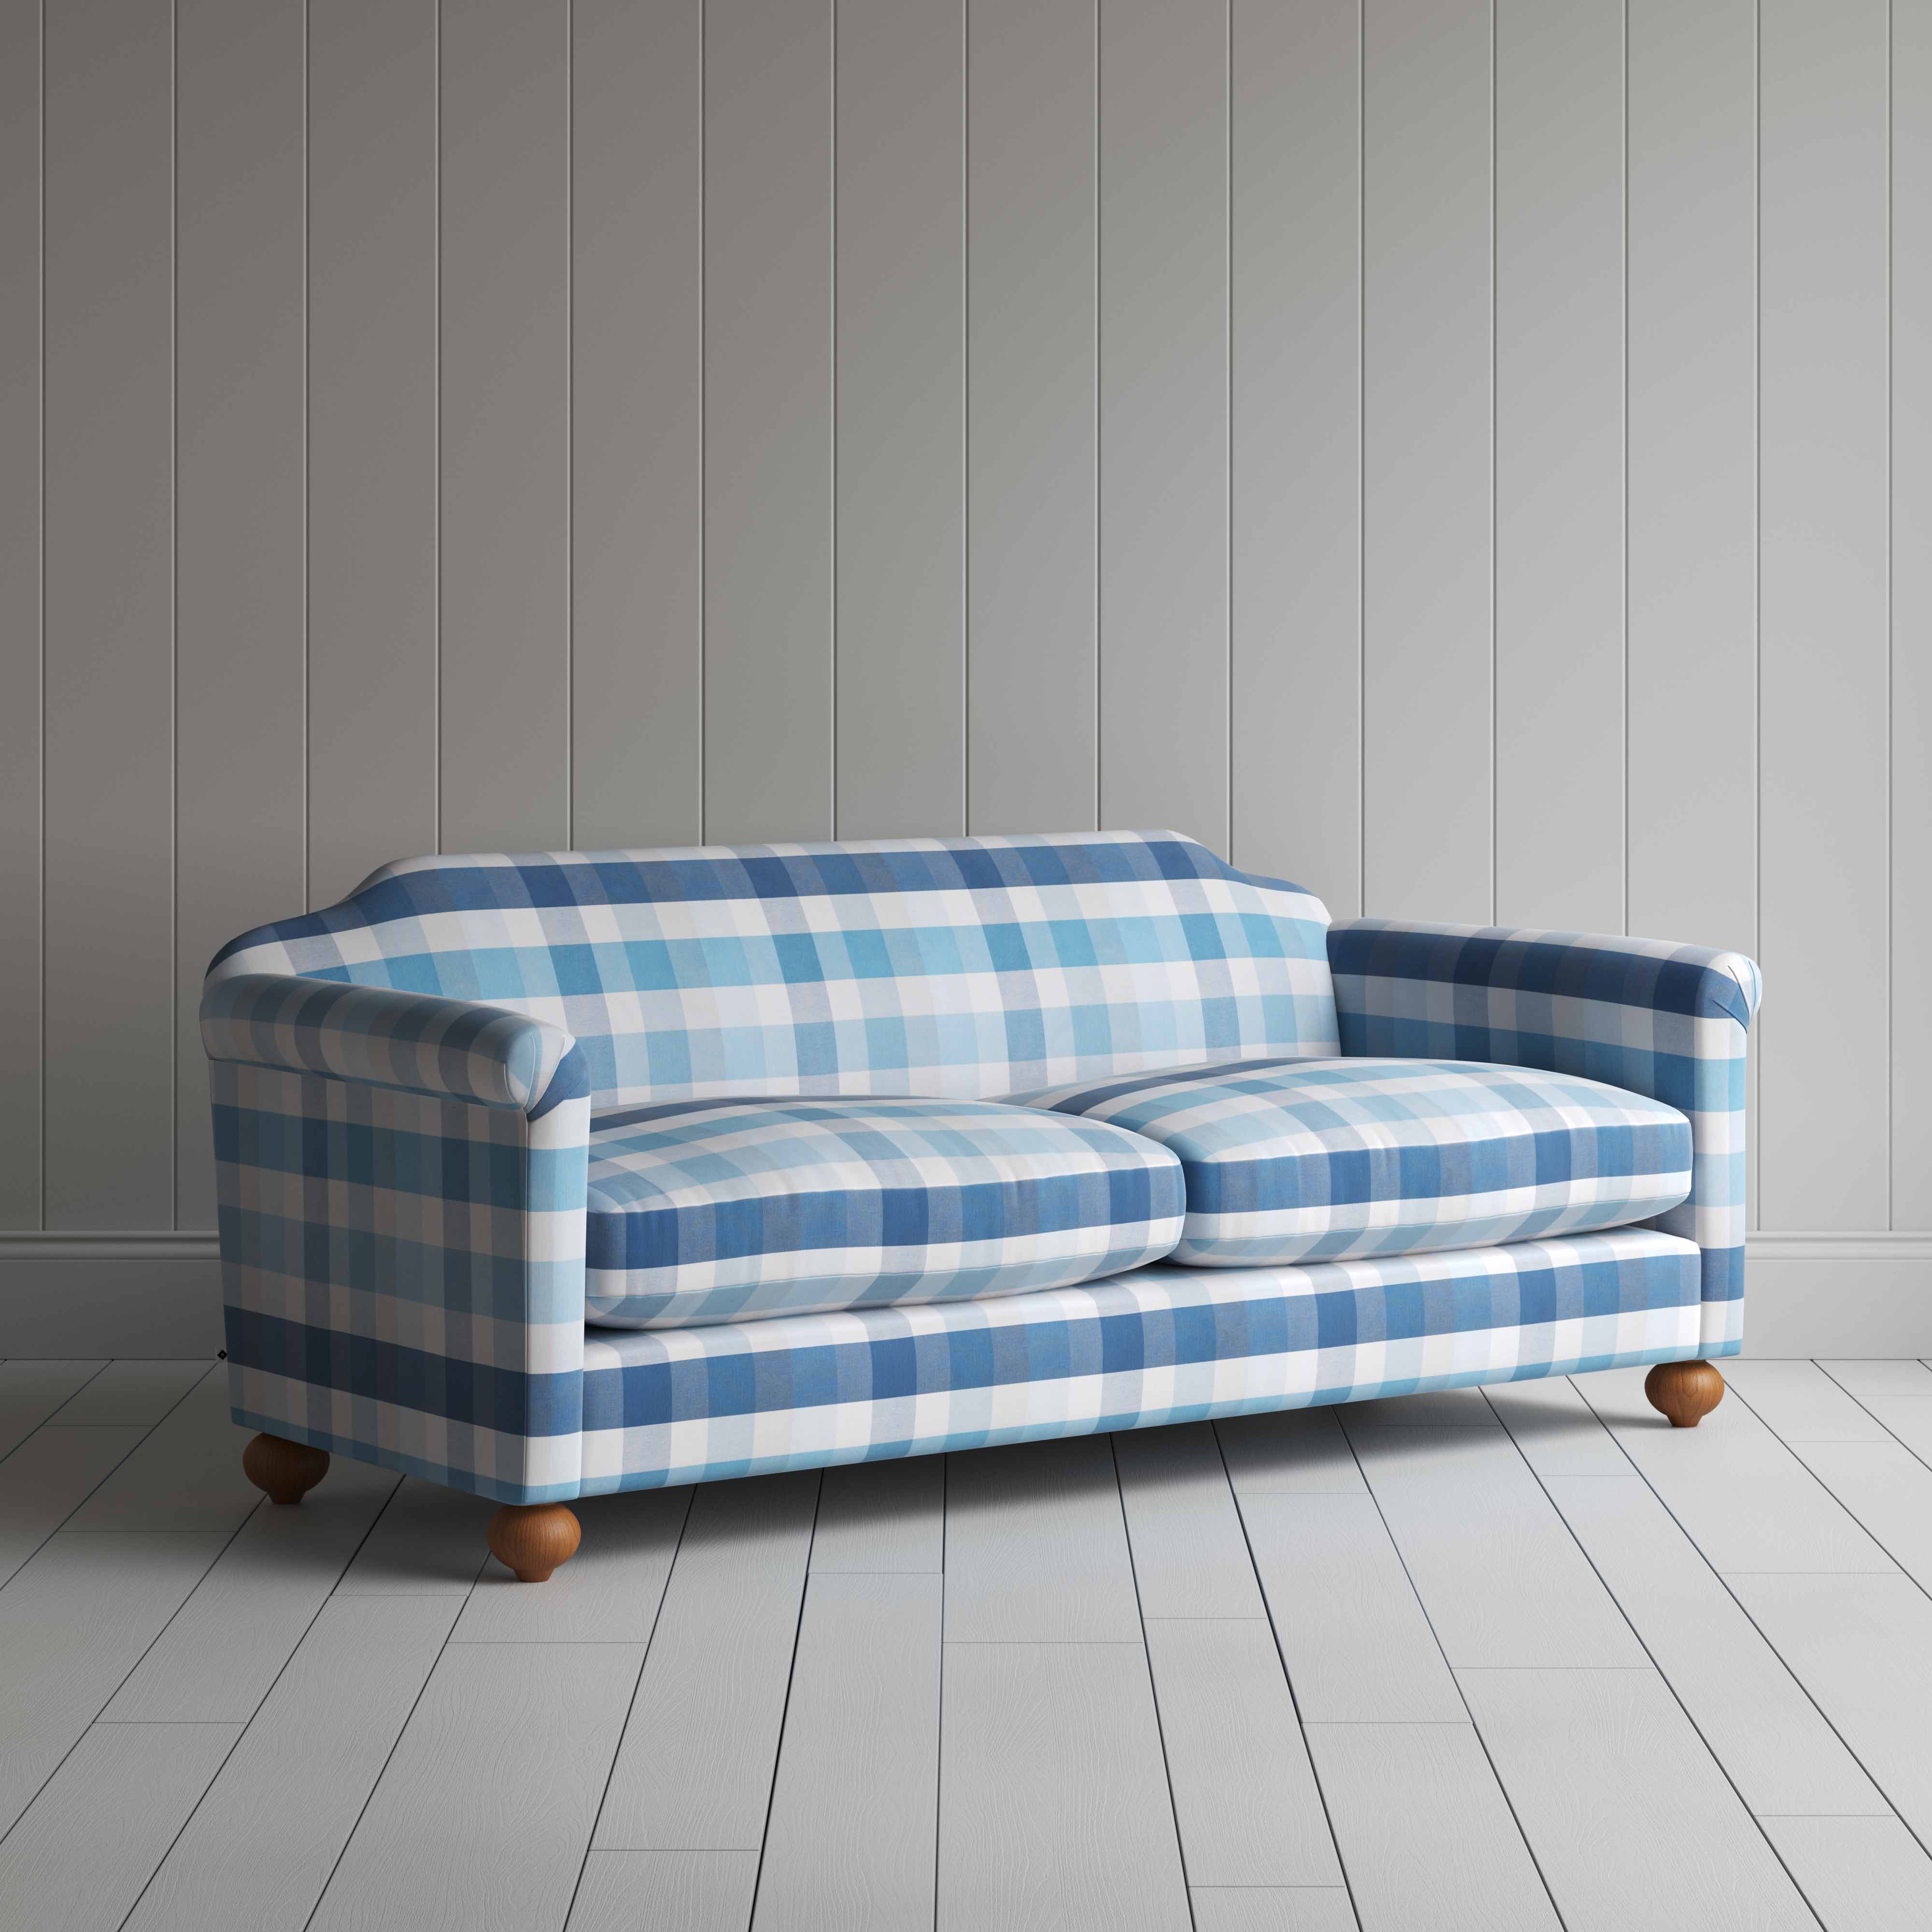  Dolittle 4 Seater Sofa in Checkmate Cotton, Blue 